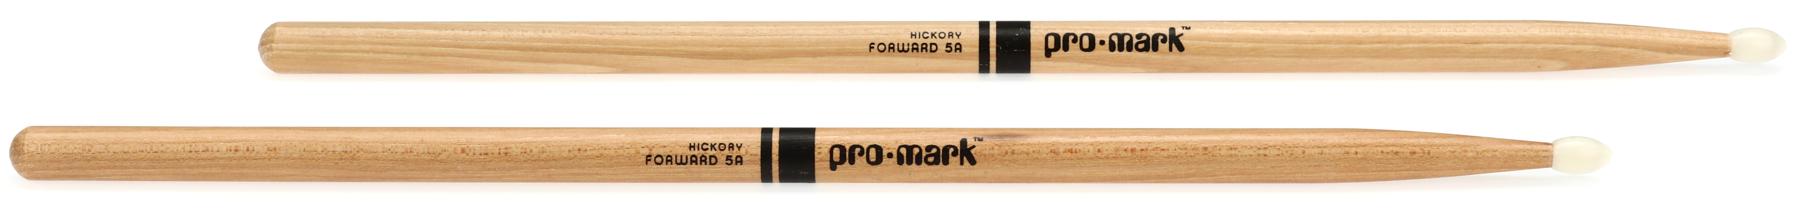 5. ProMark Classic Forward 5A Hickory Drumsticks